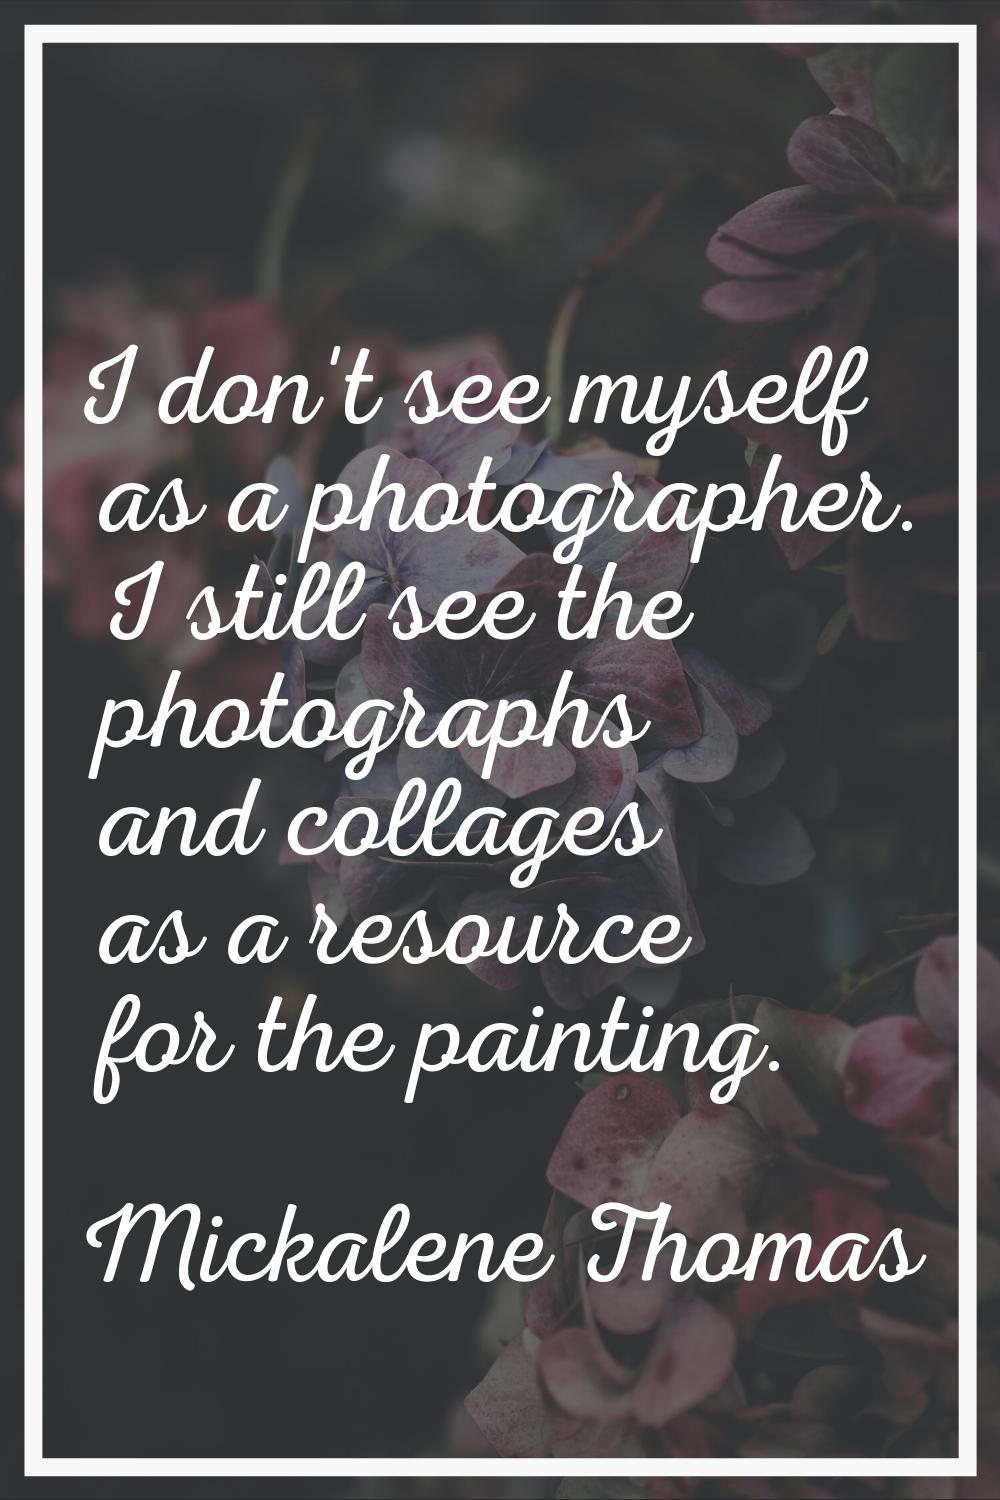 I don't see myself as a photographer. I still see the photographs and collages as a resource for th